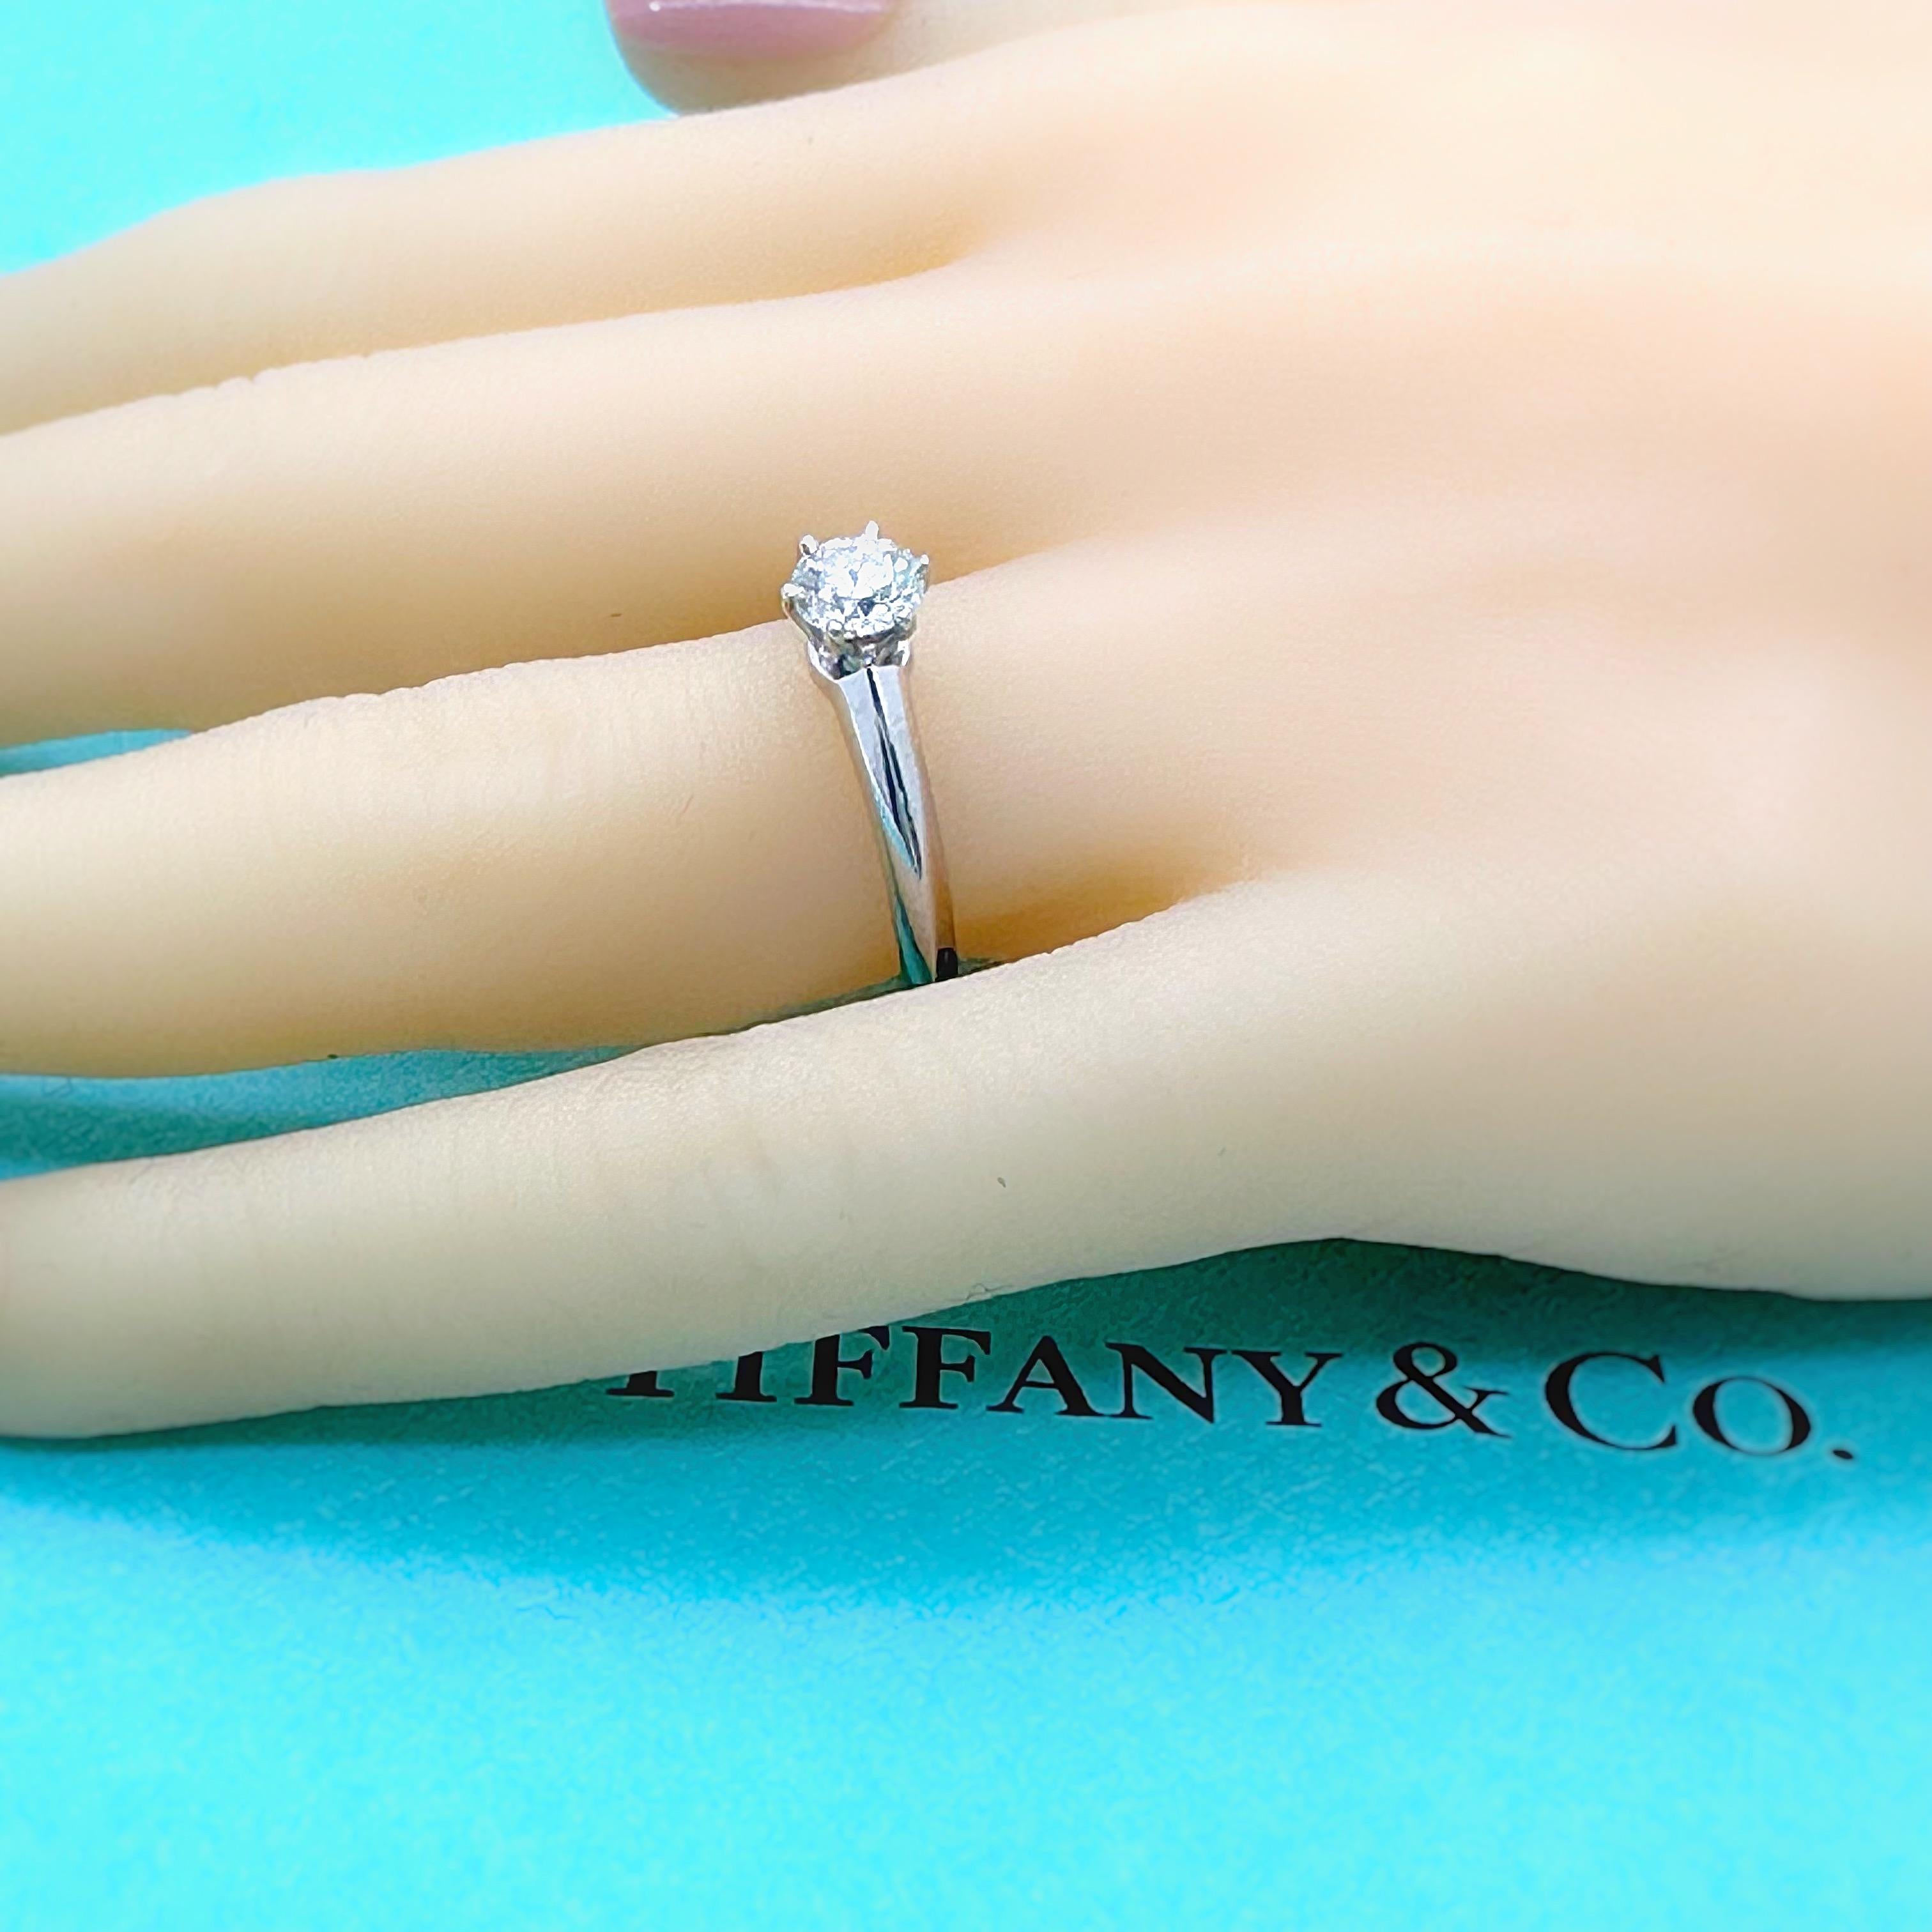 Tiffany & Co Round Brilliant Diamond 0.41 ct E VS1 Solitair Plat Engagement Ring For Sale 8